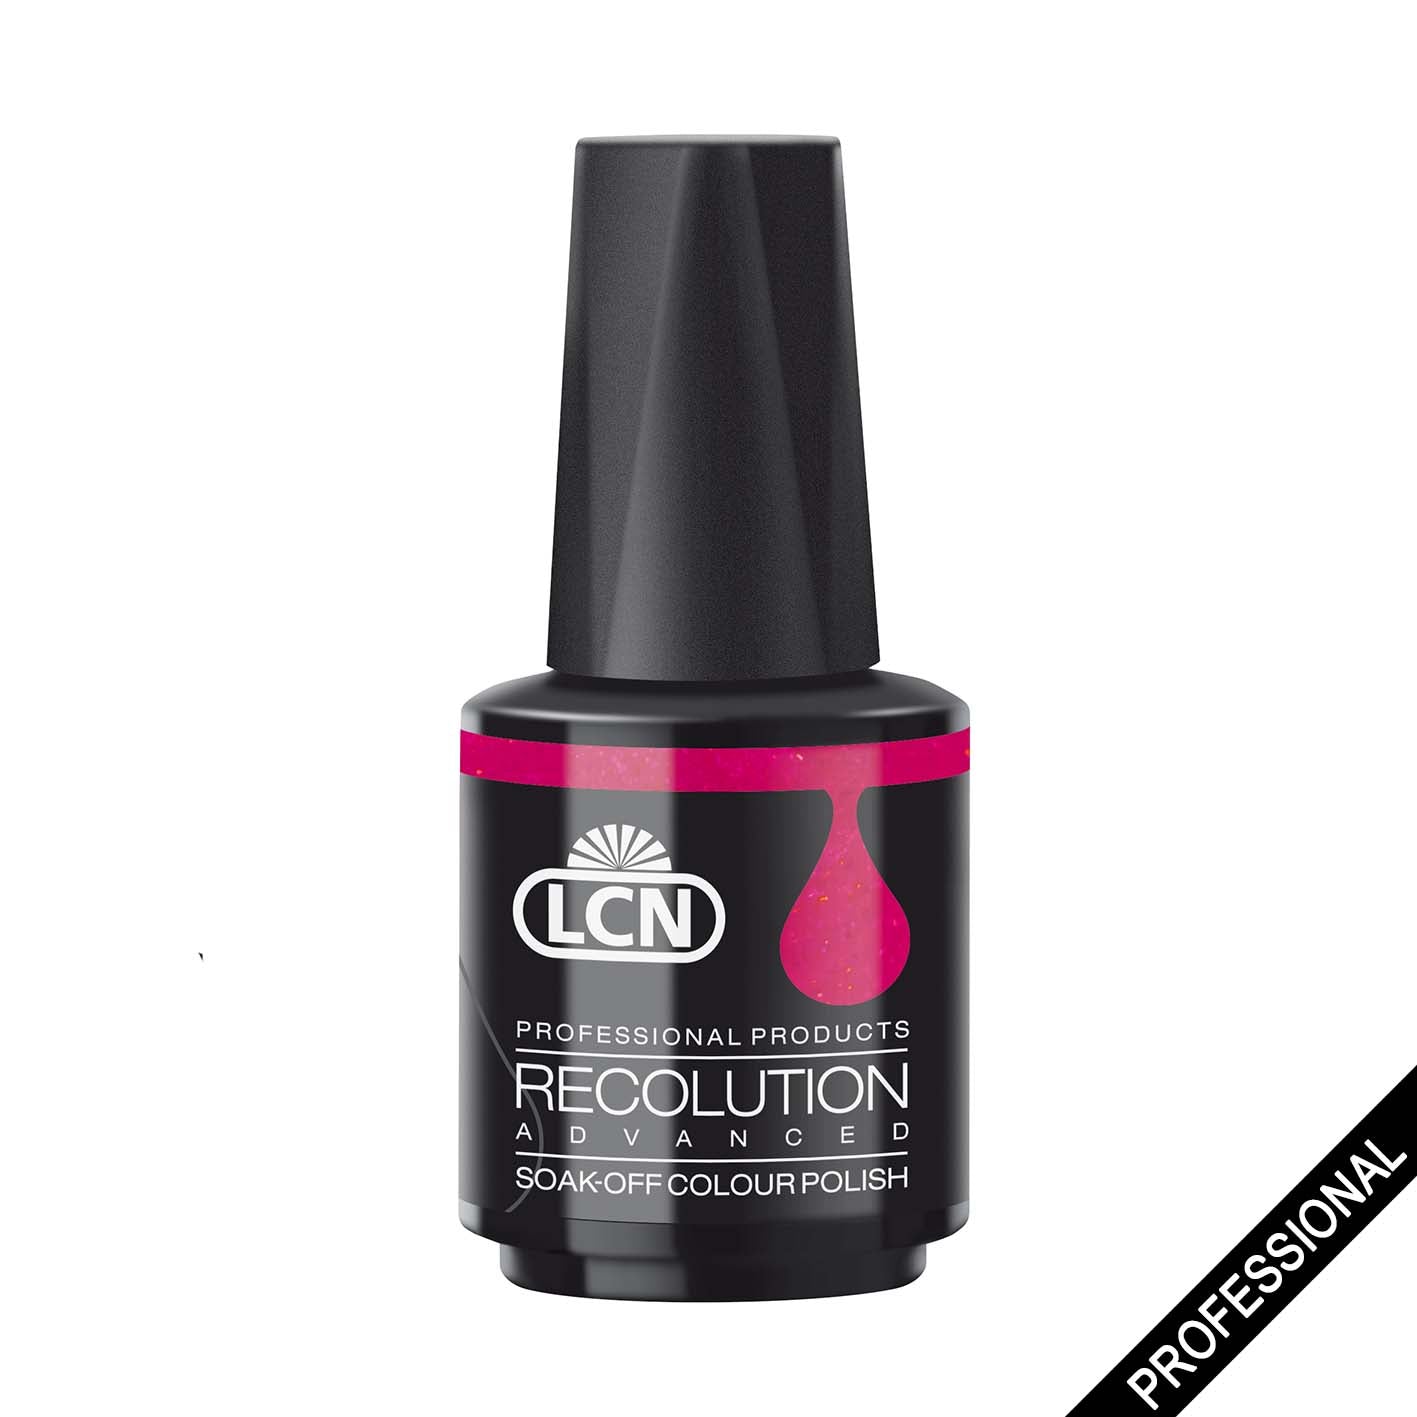 605 - Sparkling Neon Pink Recolution Advanced 10ml